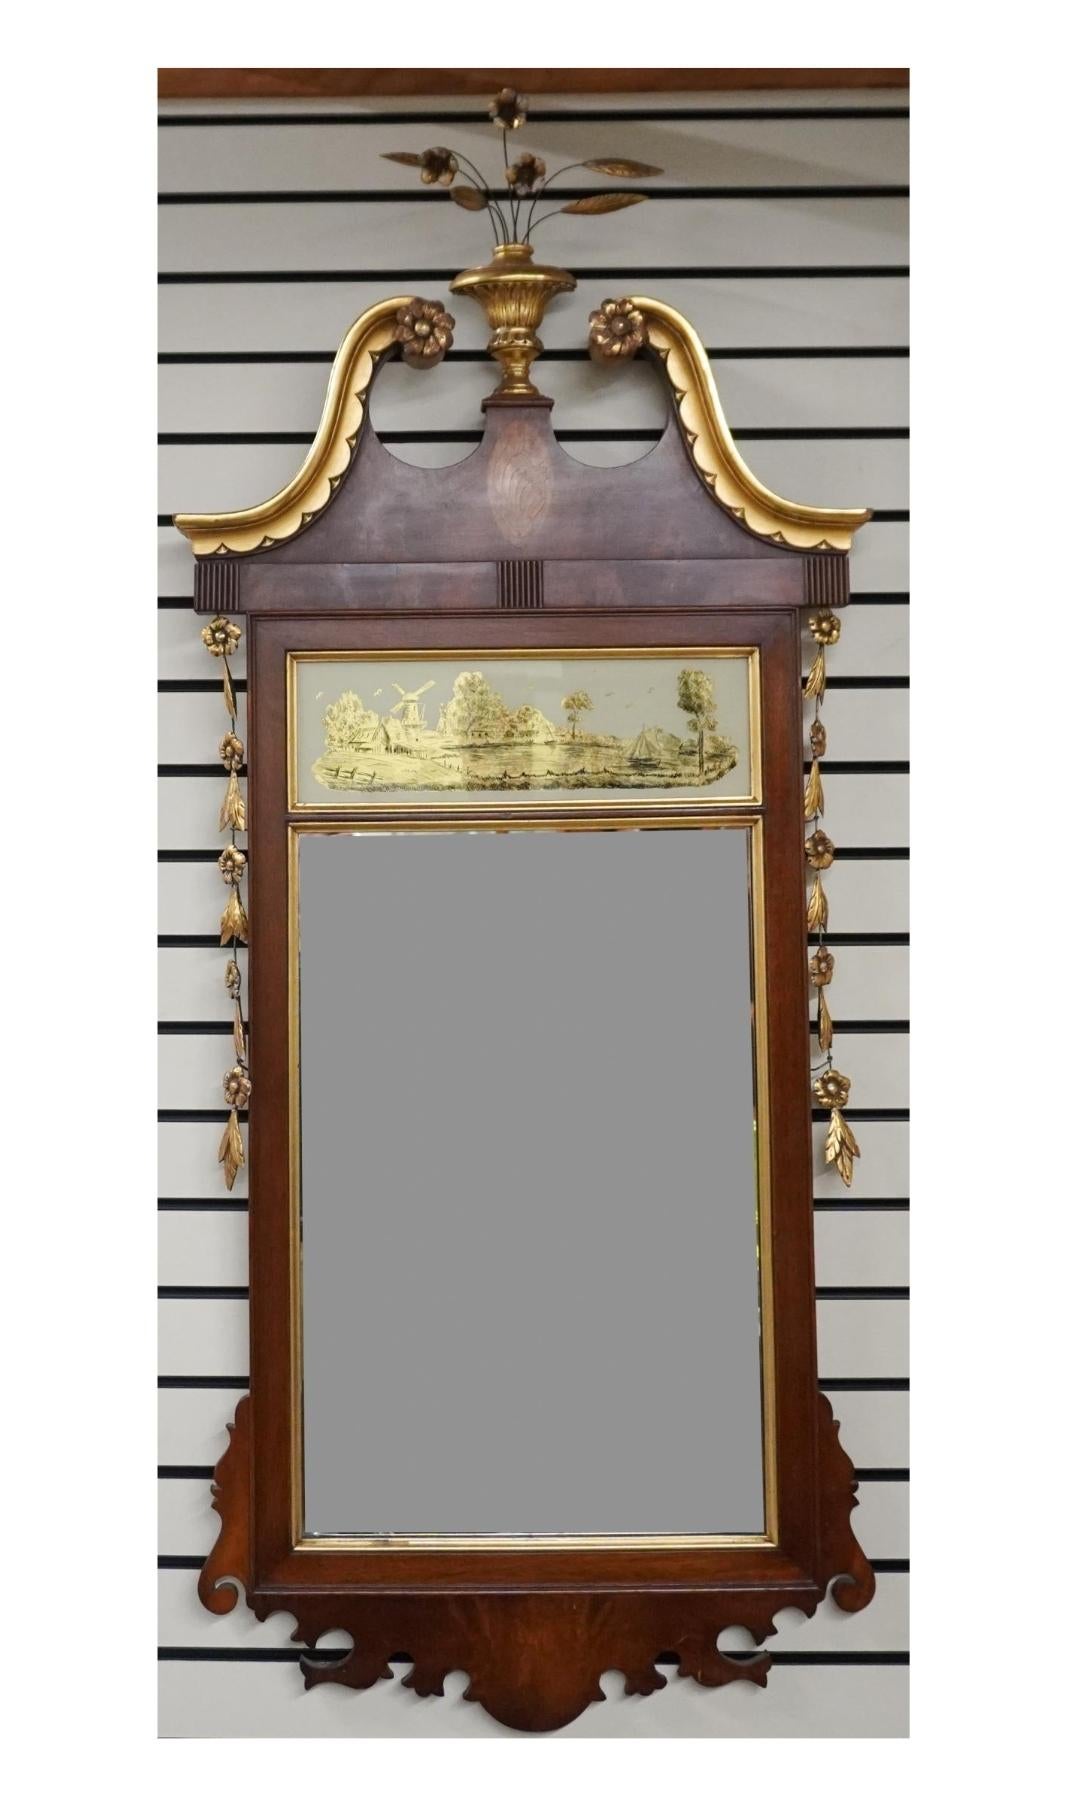 Federal Satinwood Inlaid Carved Mahogany Parcel Gilt And Eglomise Painted Mirror For Sale 5